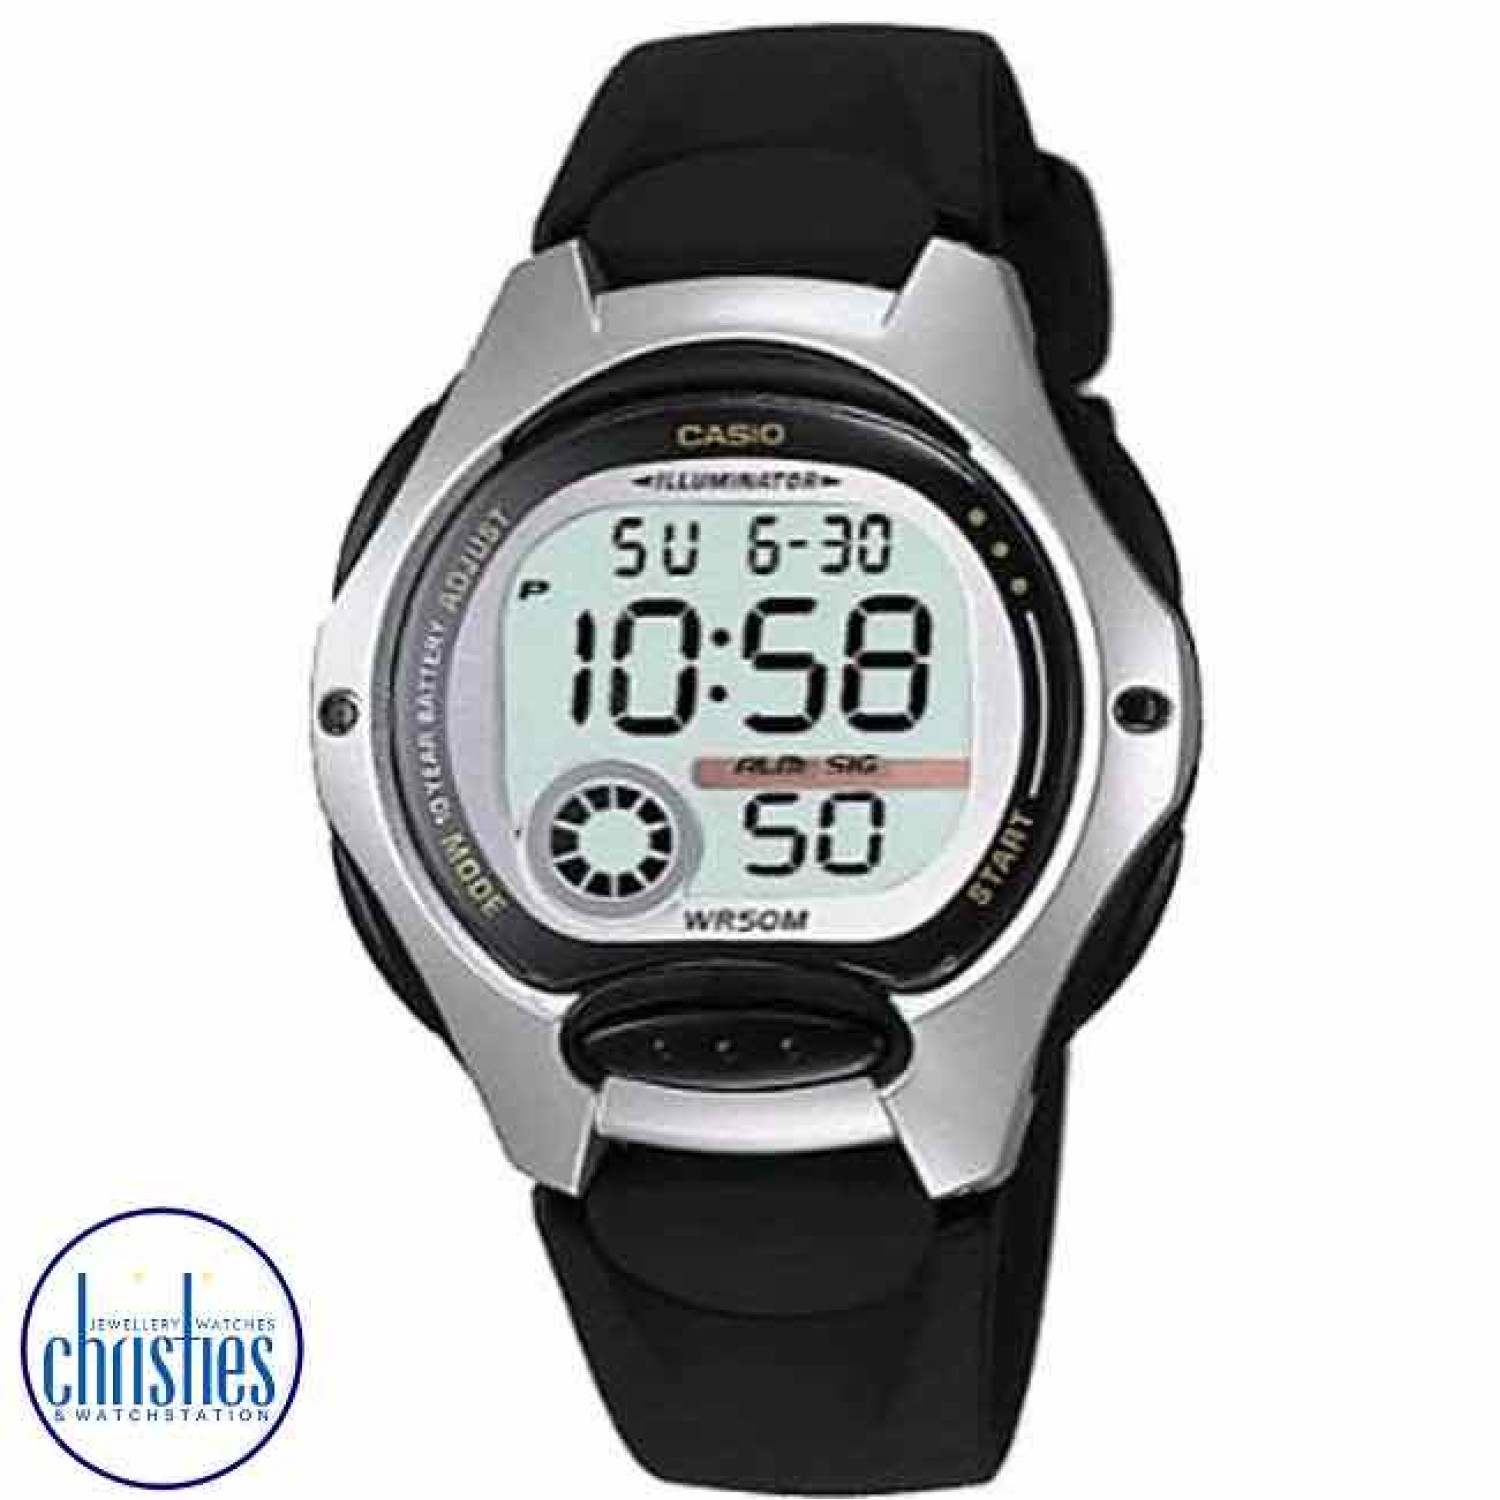 LW200-1A Casio 50 Metres Watch. Casio’s Illuminator digital watch is a sleek and sporty timepiece featuring a black plastic resin band, a metallic resin case and a large digital time display with stopwatch and day and date functions. Water-resistant to @c